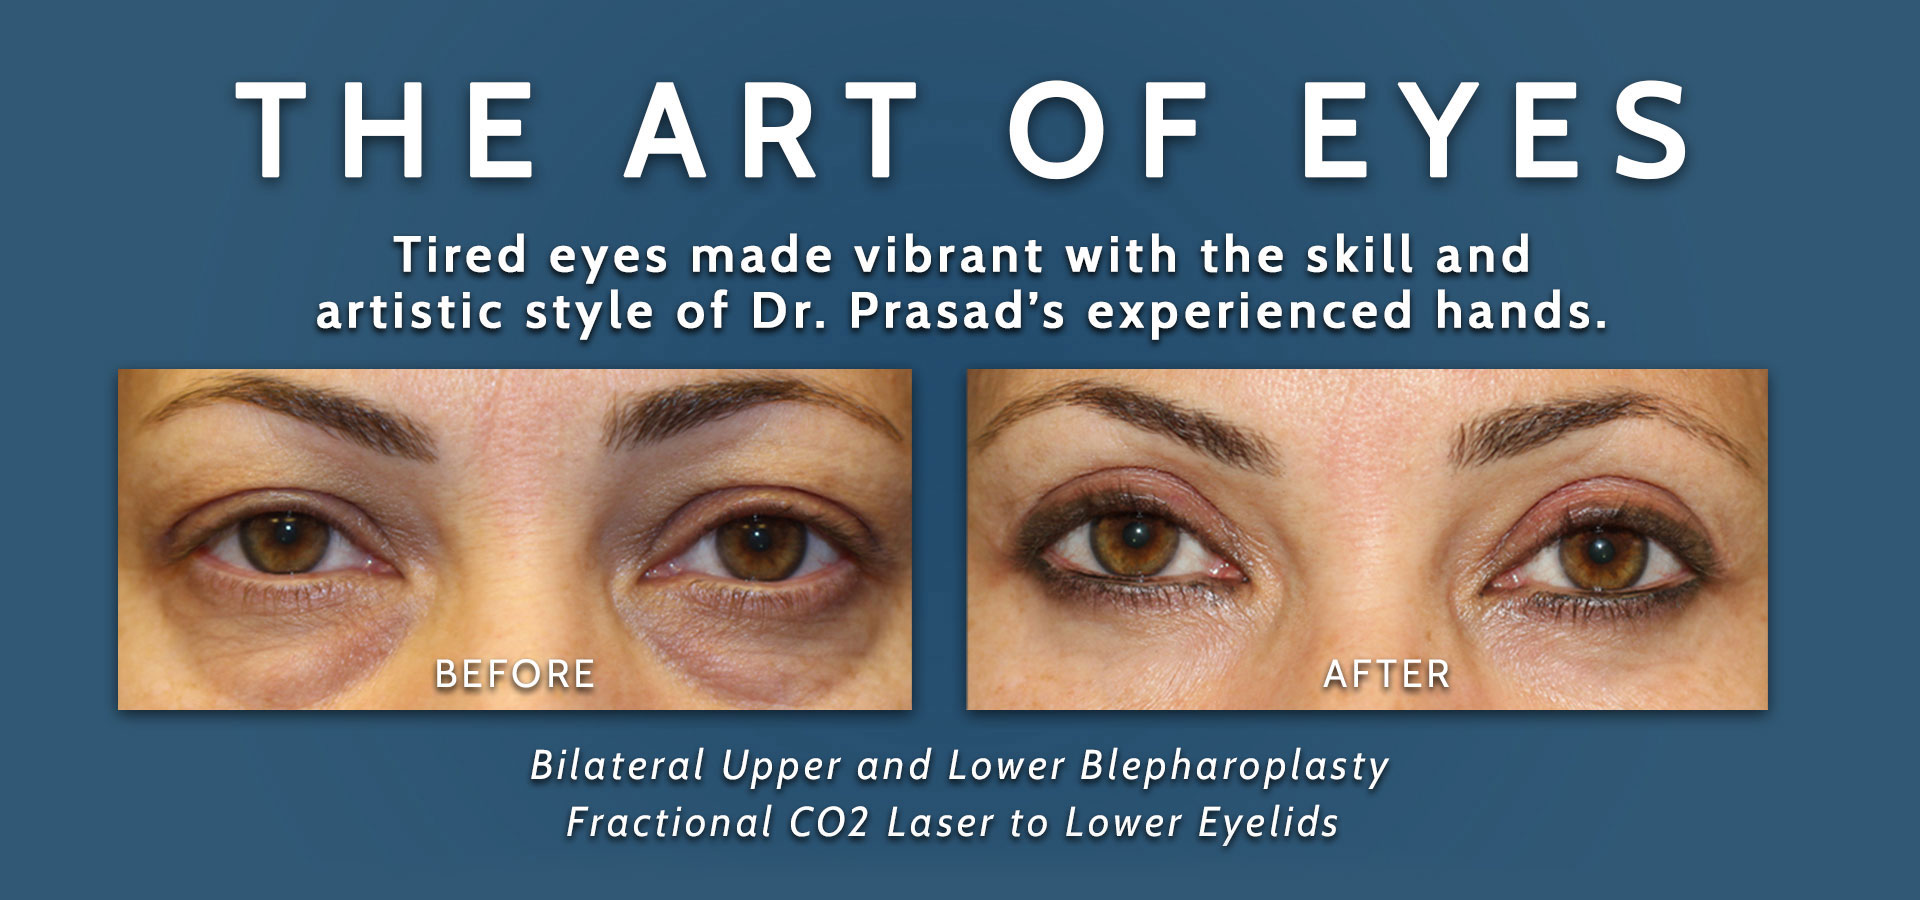 the art of eyes - before and after upper and lower blepharoplasty and laser under eyes